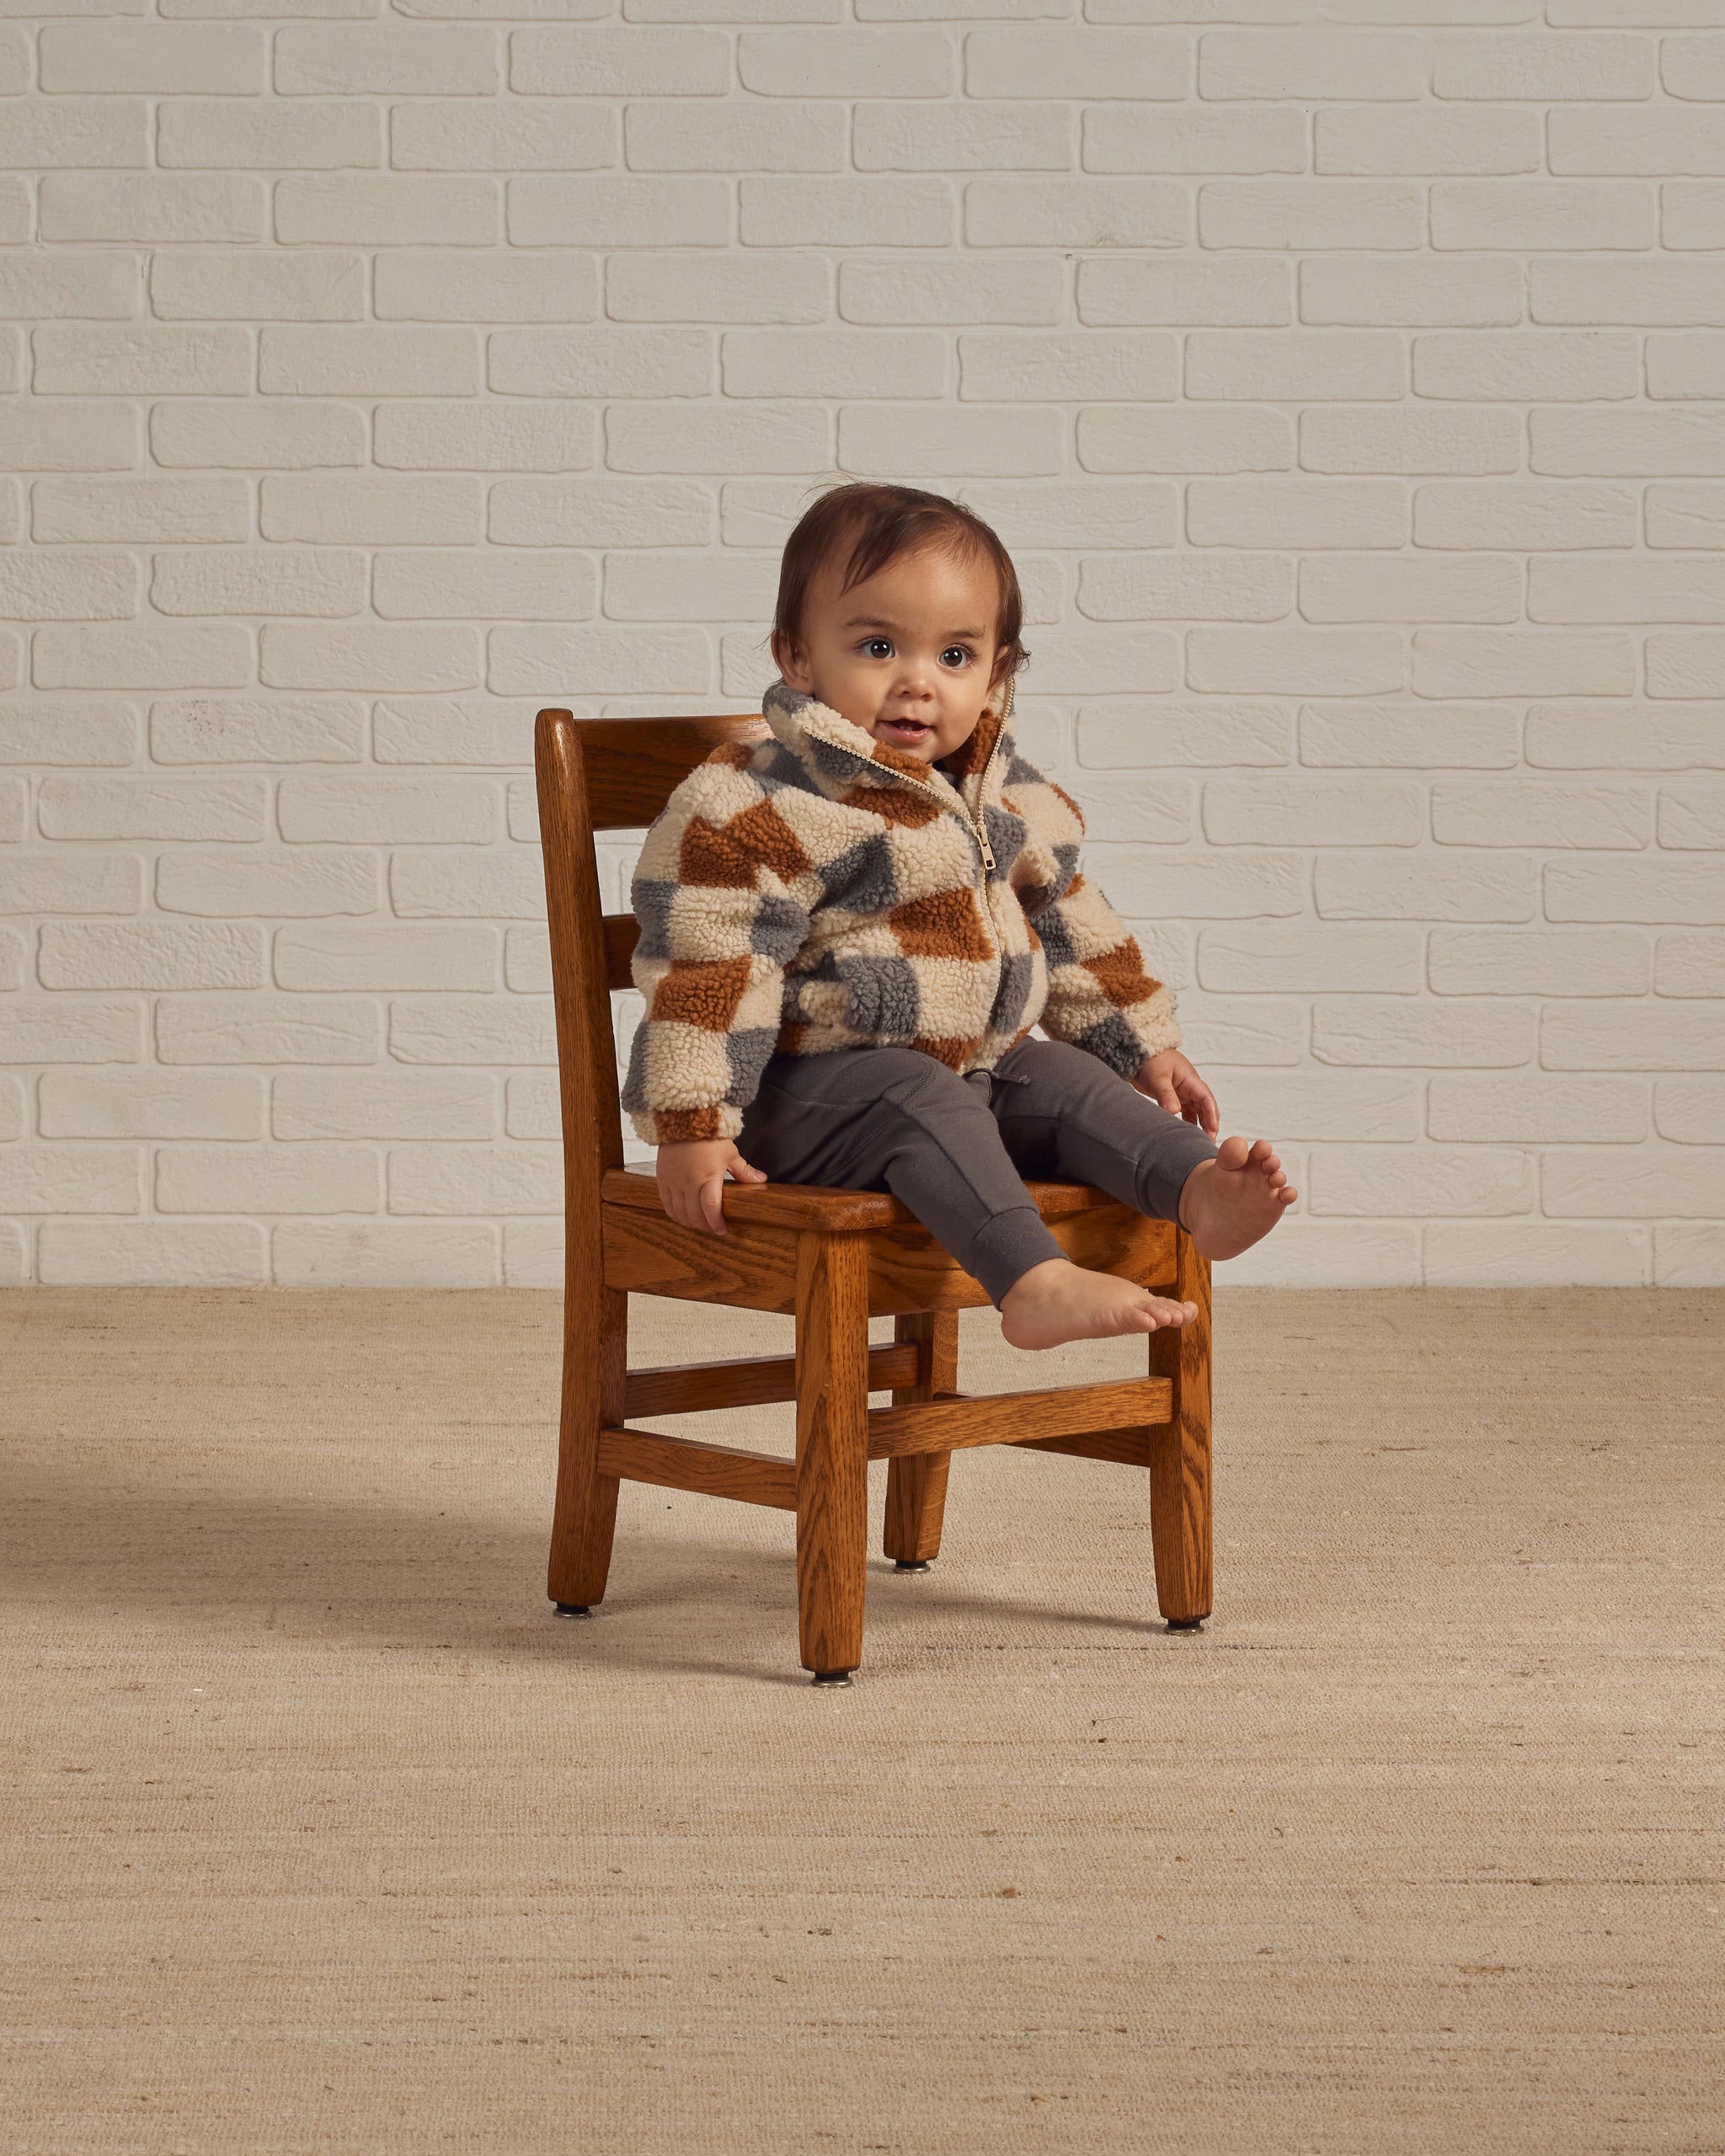 Coco Jacket || Shearling Check - Rylee + Cru | Kids Clothes | Trendy Baby Clothes | Modern Infant Outfits |